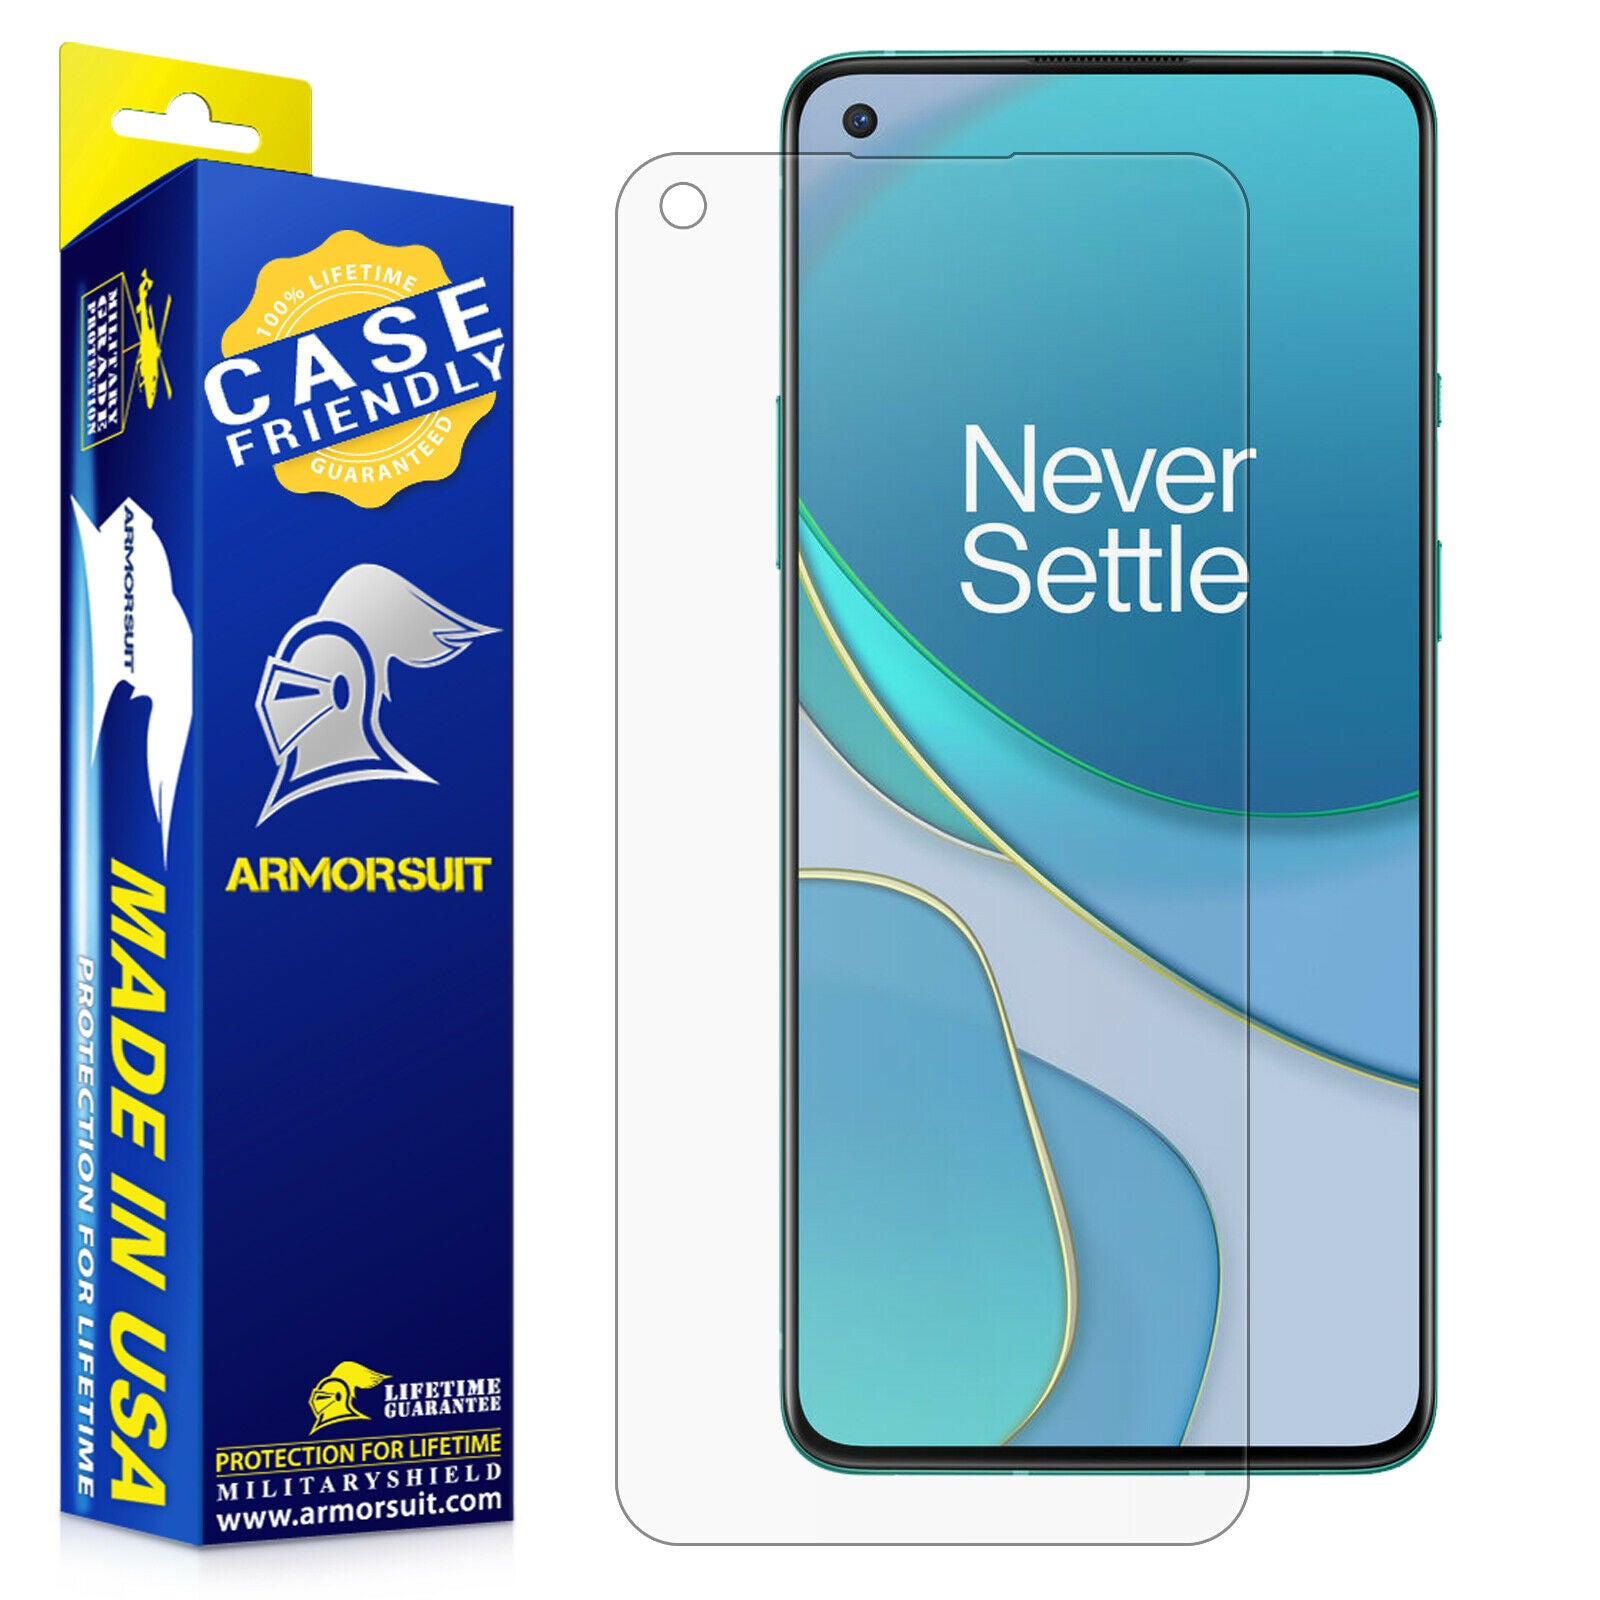 [2 Pack] OnePlus 8T Screen Protector - Case-Friendly Matte